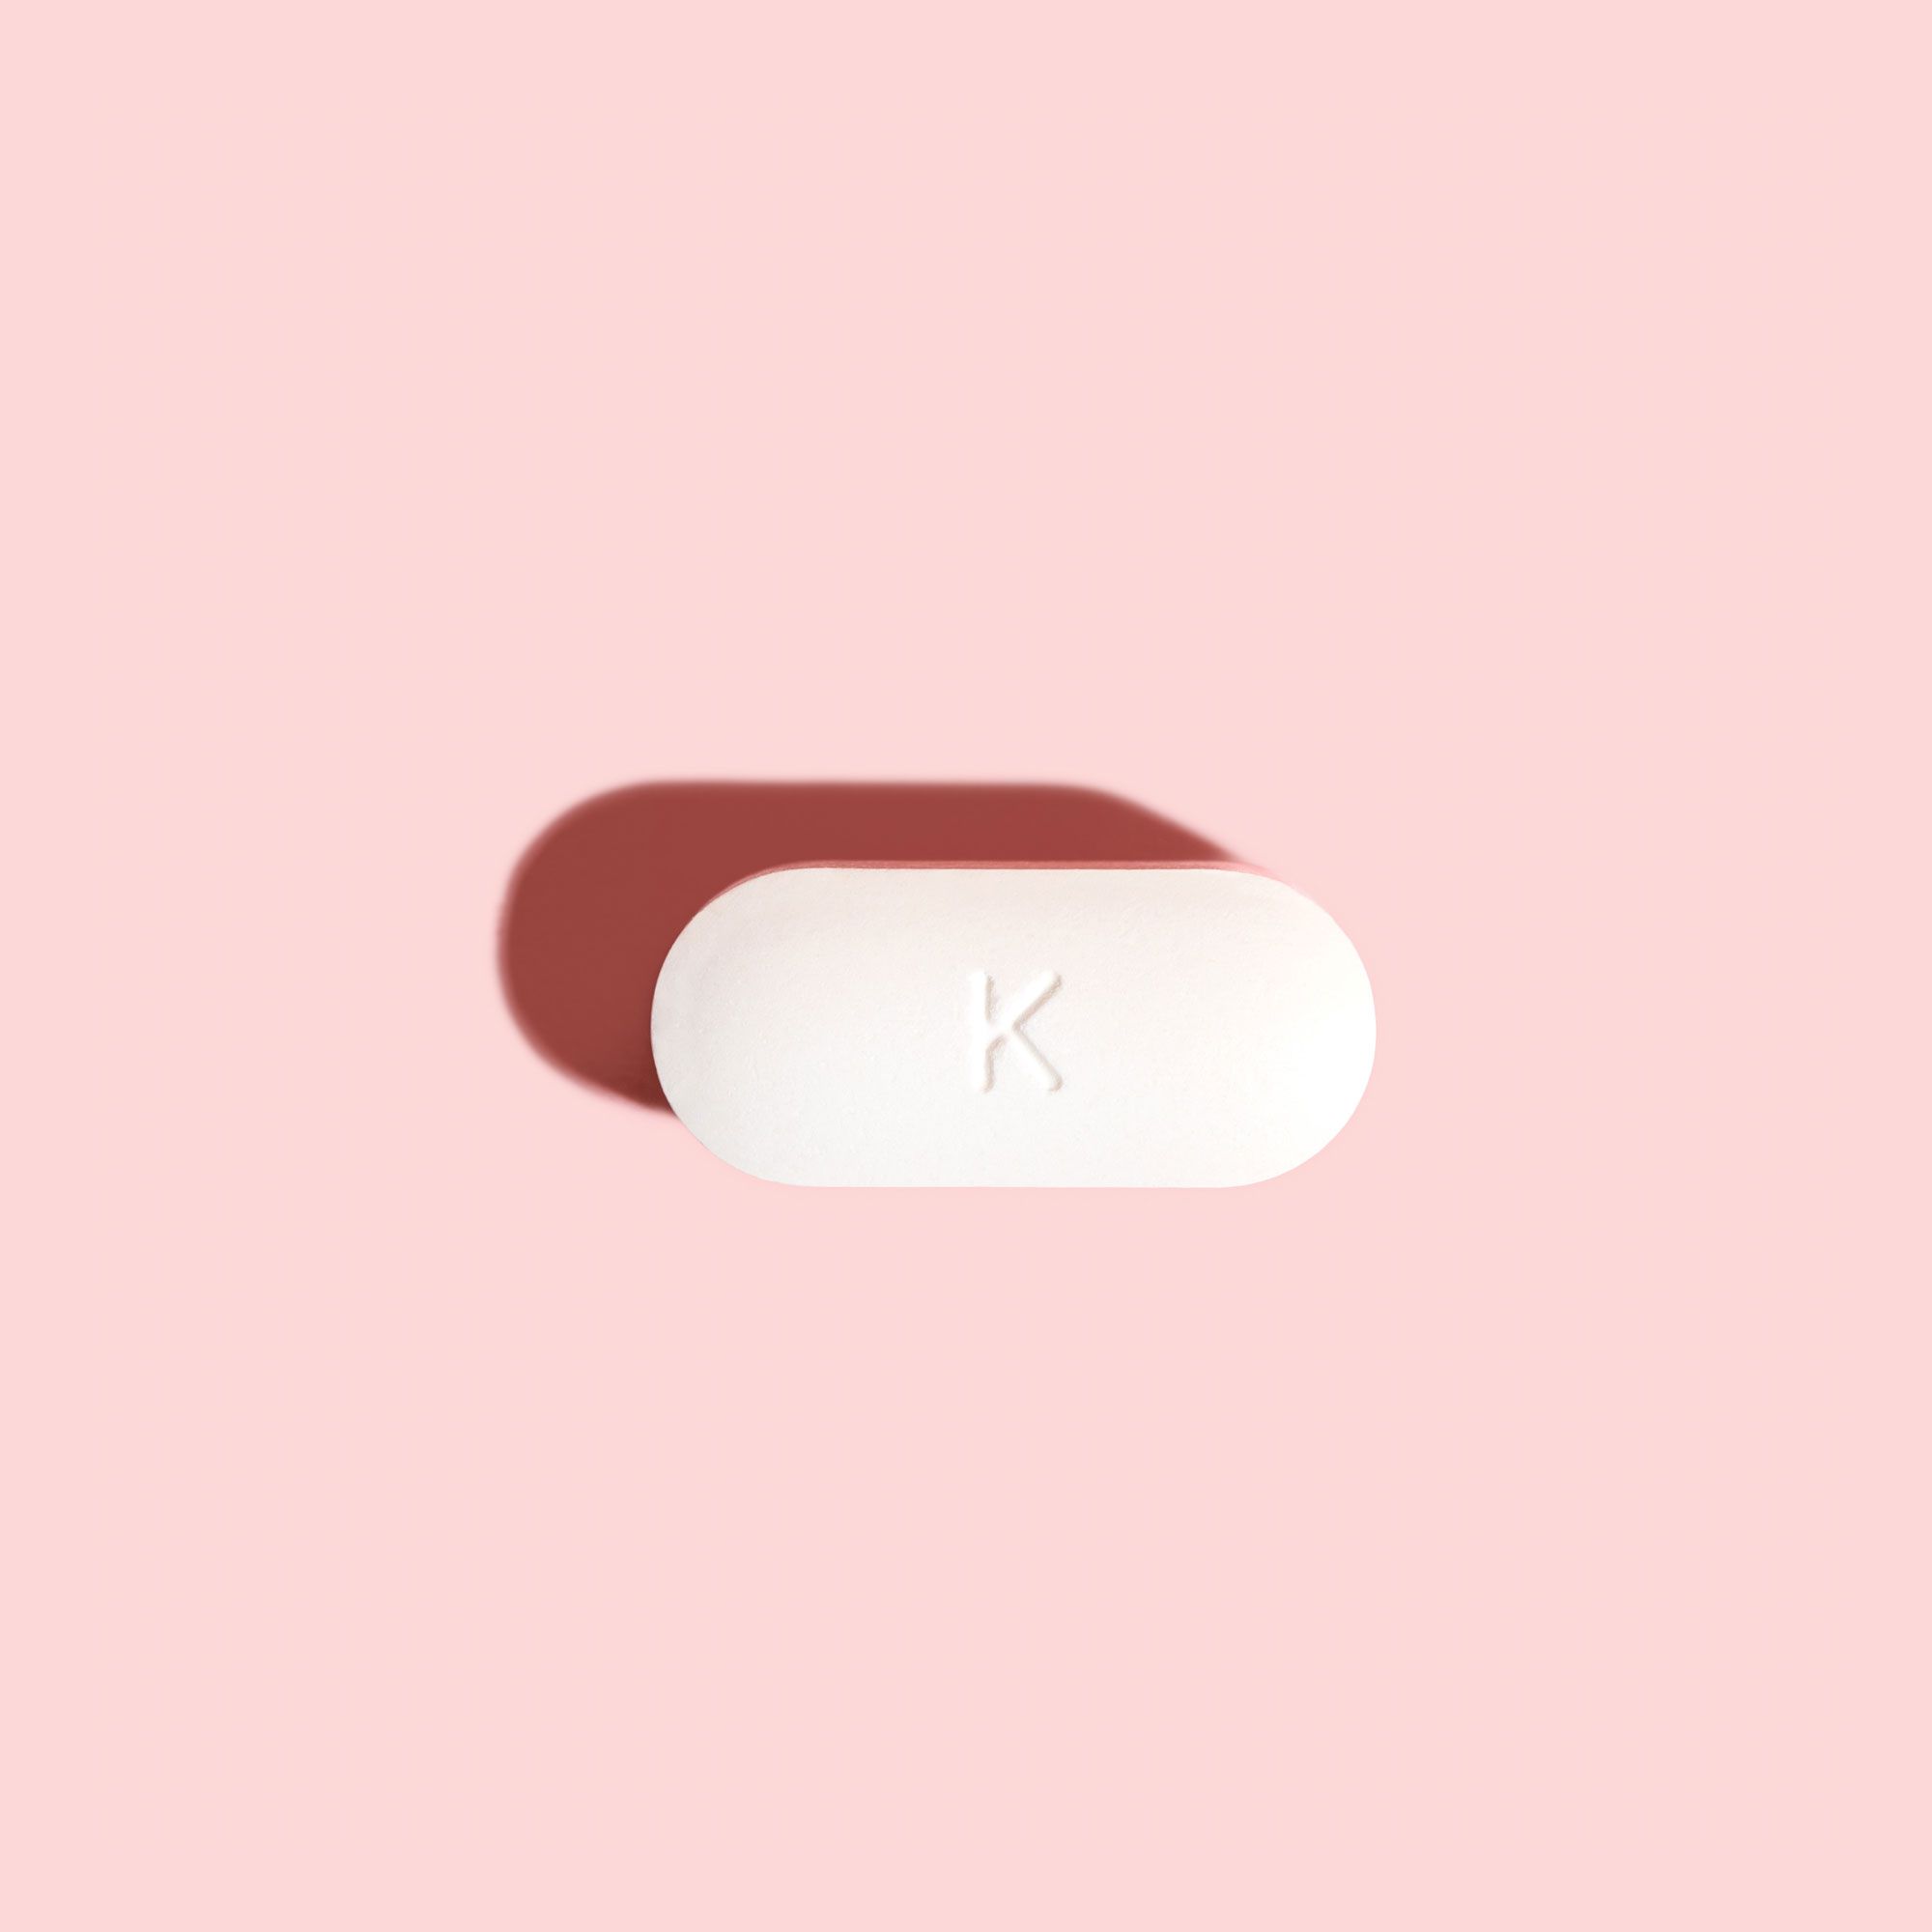 Single BV antibiotic tablet to treat bacterial vaginosis on a pink background and red surface